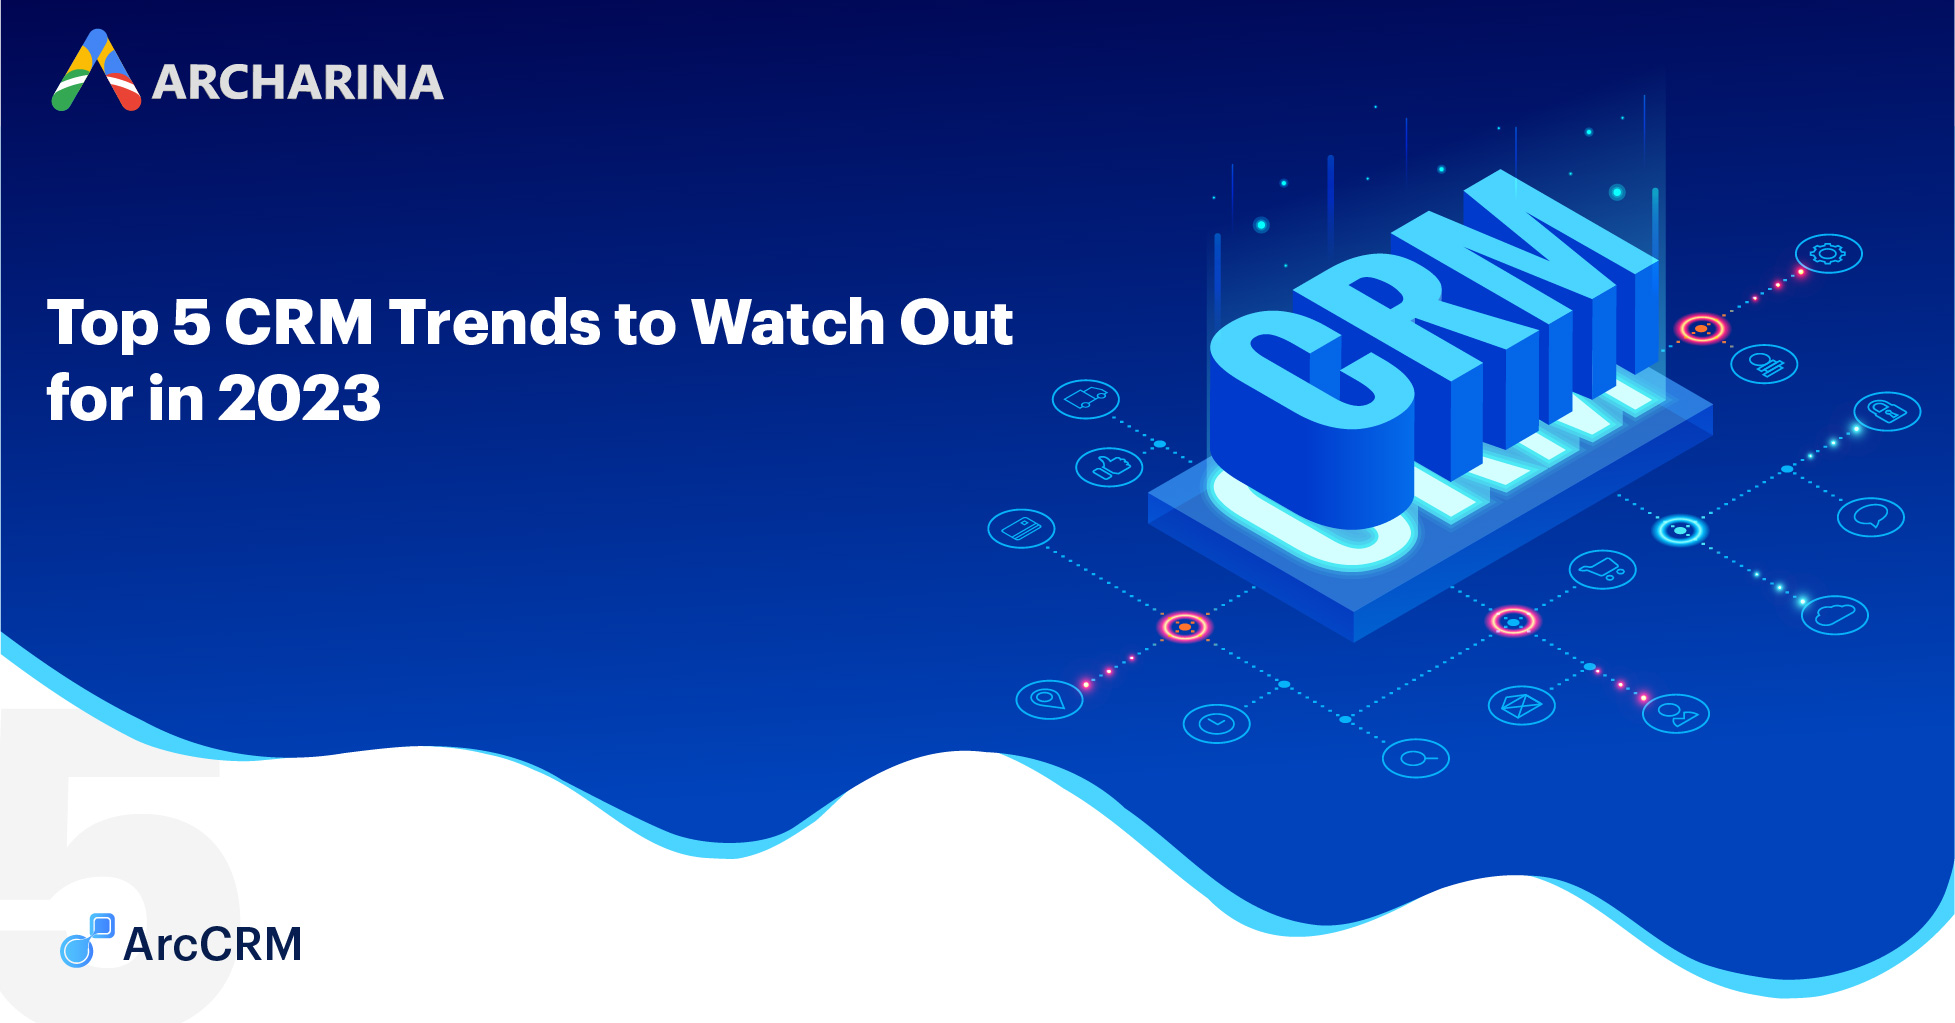 Top 5 CRM Trends to Watch Out for in 2023